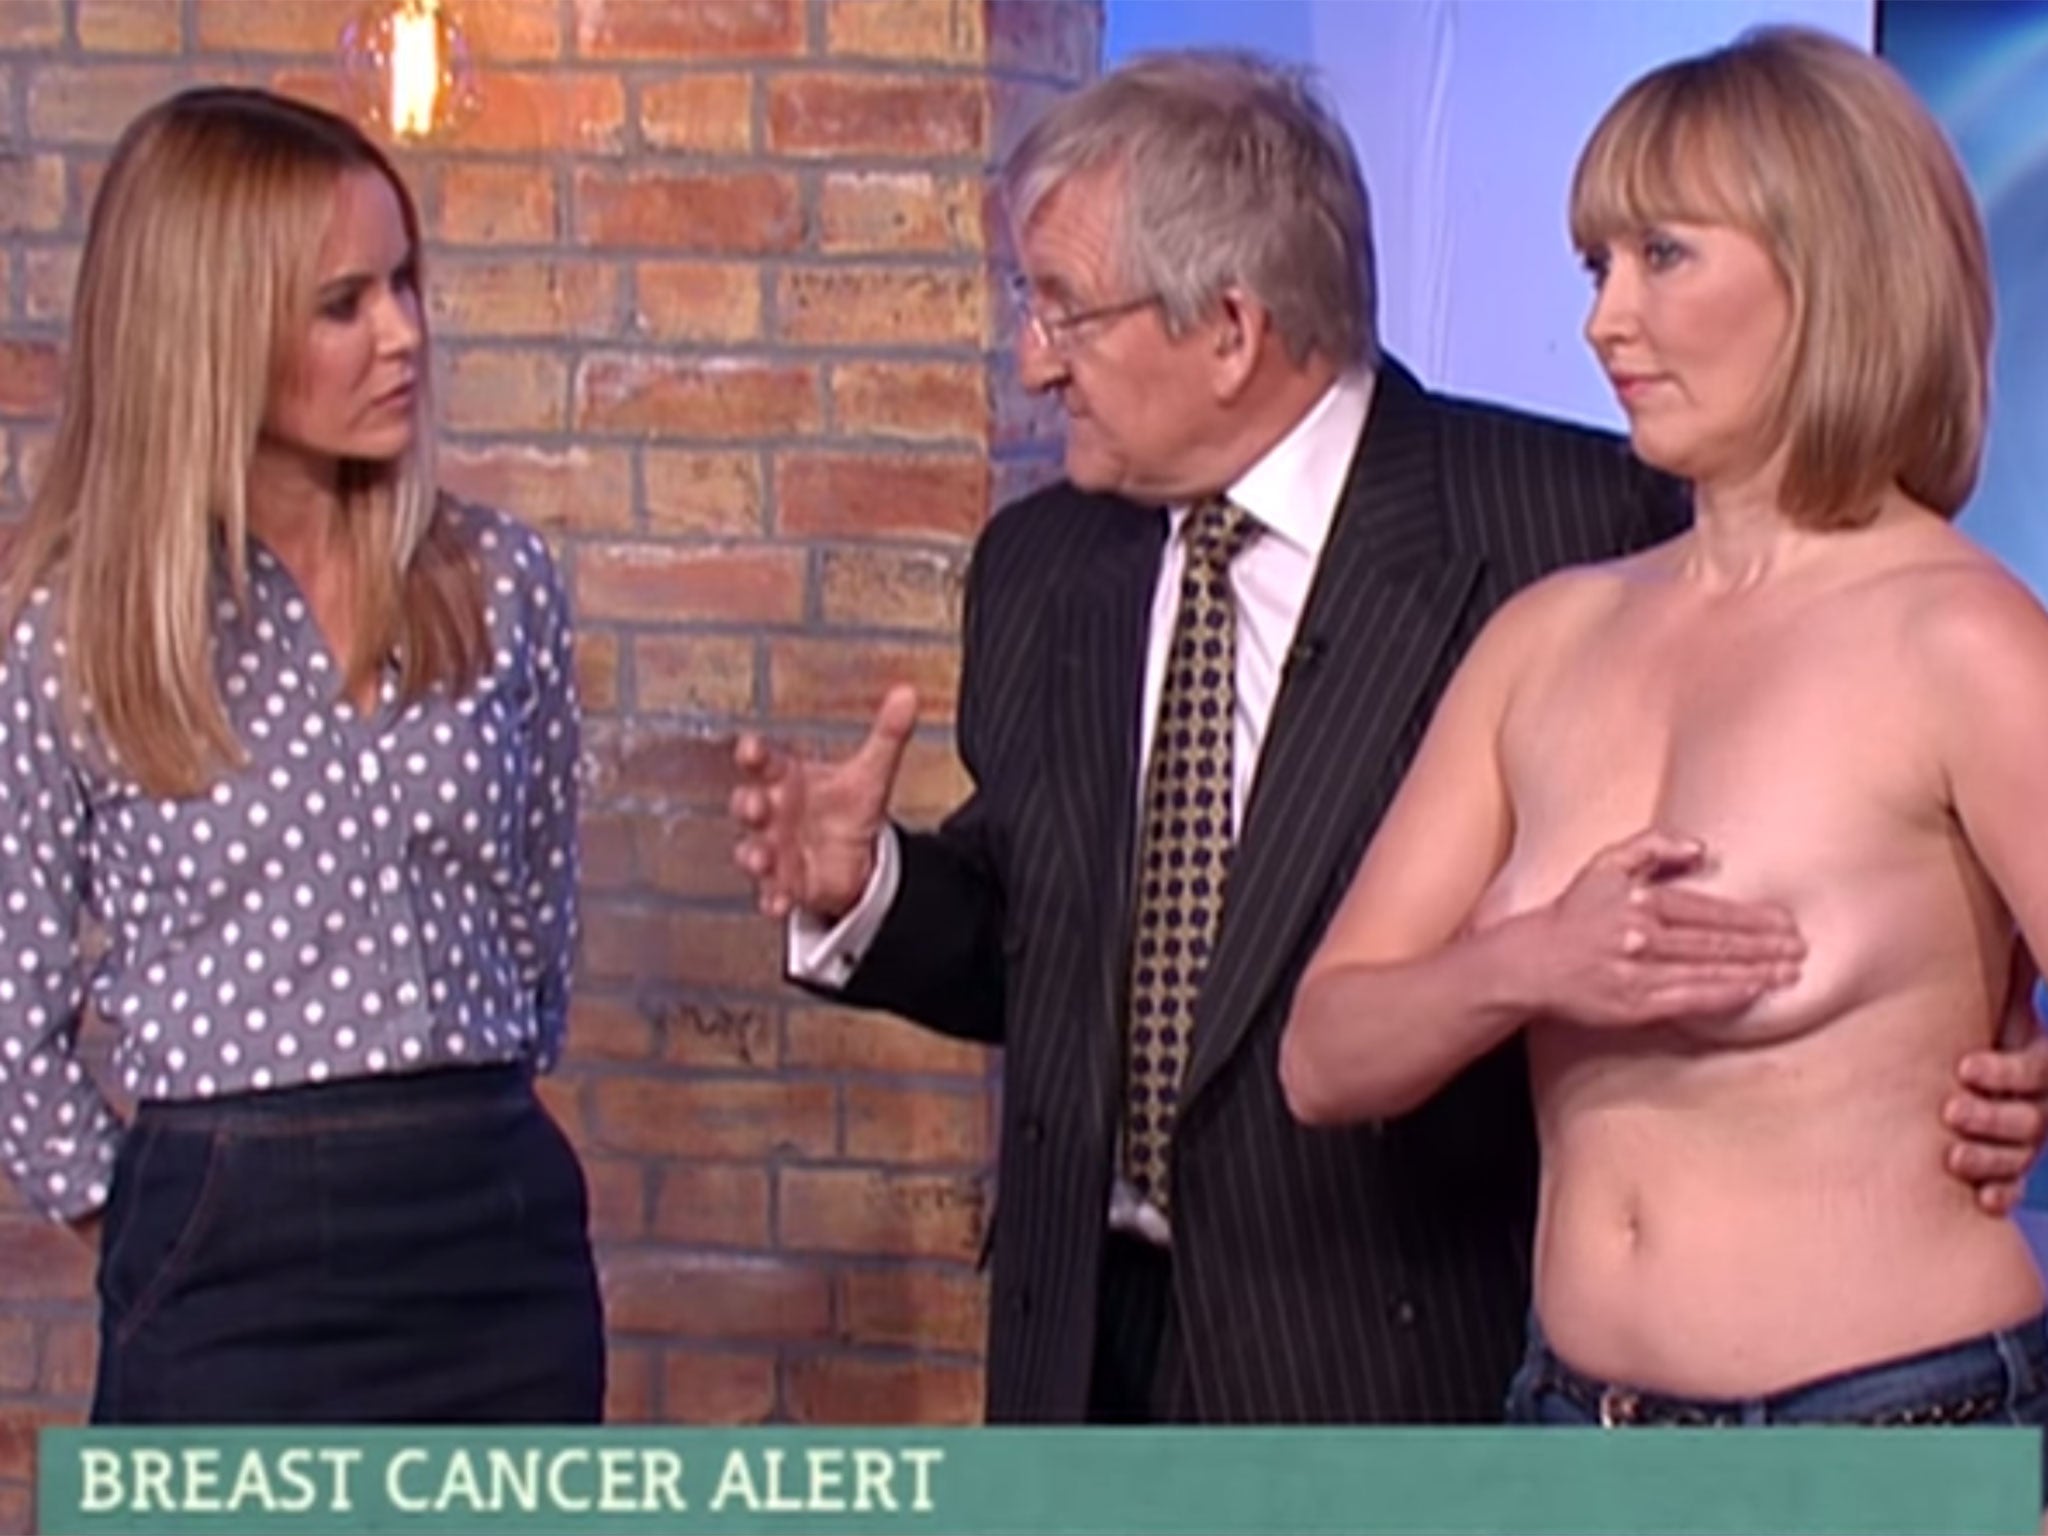 This Morning aired a segment teaching people how to perform breast checks